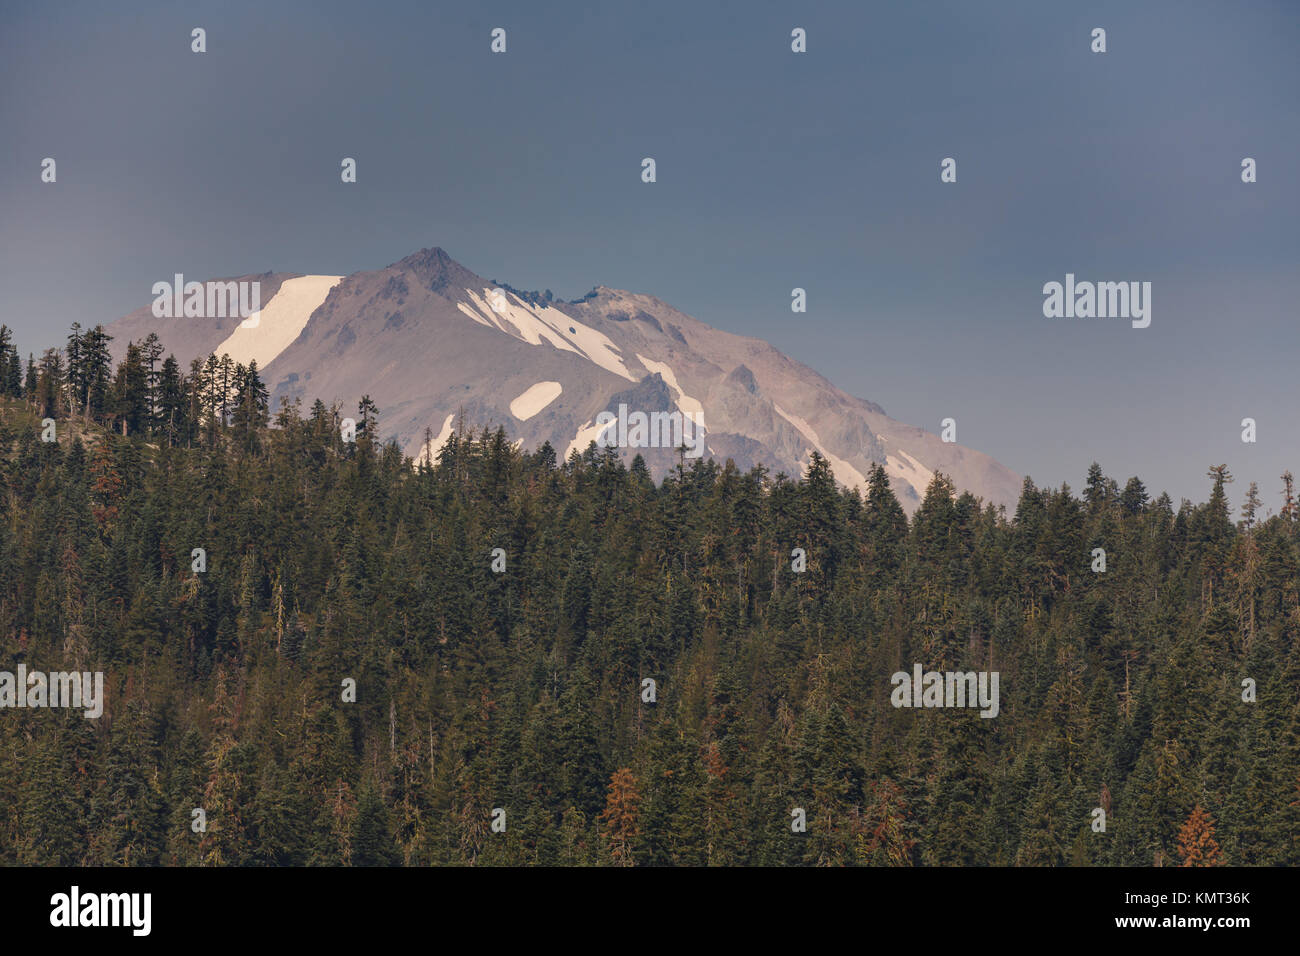 Snow capped volcano rises above Alpine forest in Lassen Volcanic National Park Stock Photo